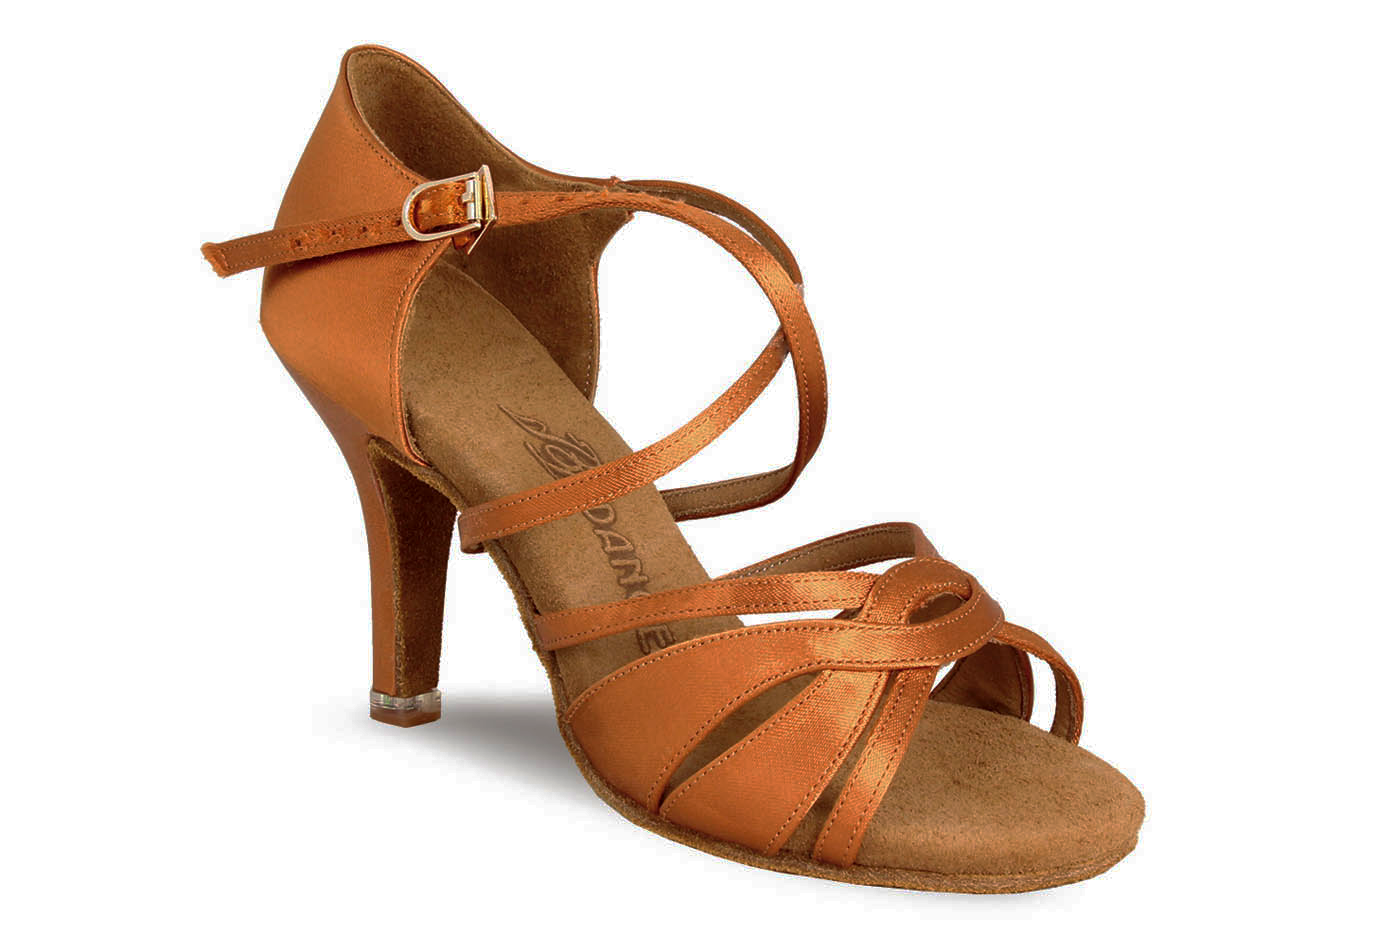 Dark Tan Satin Ladies Latin Shoe with Cross Ankle Strap and Gold Crown on Back of Heel BD Dance 2383_SALE